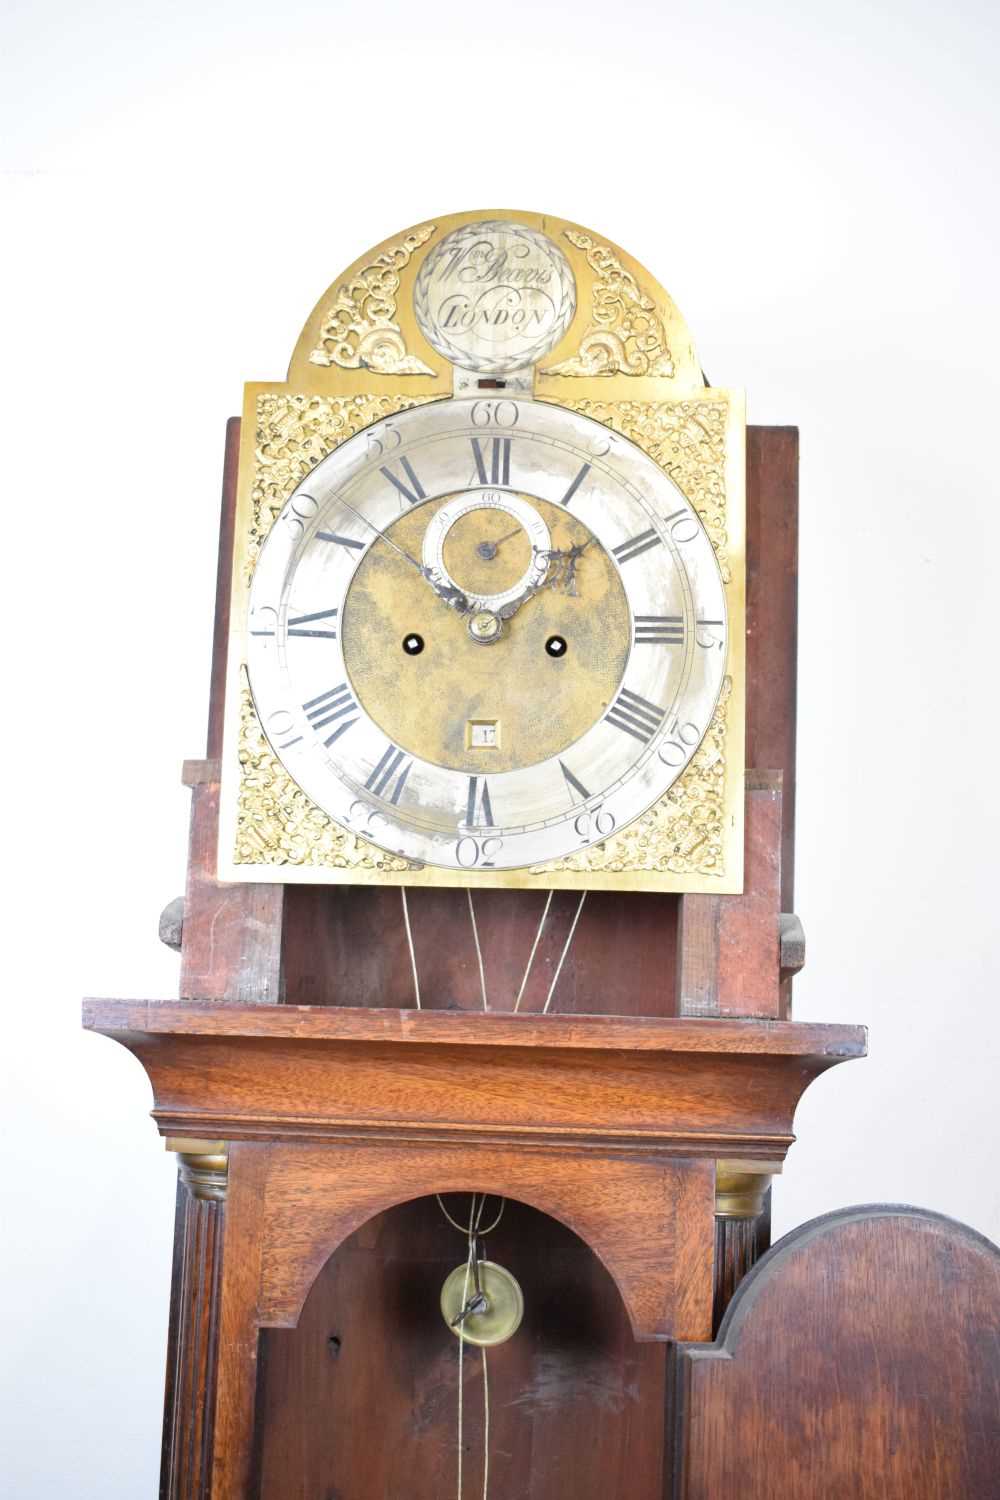 Early George III mahogany-cased 8-day brass dial longcase clock - Image 9 of 9